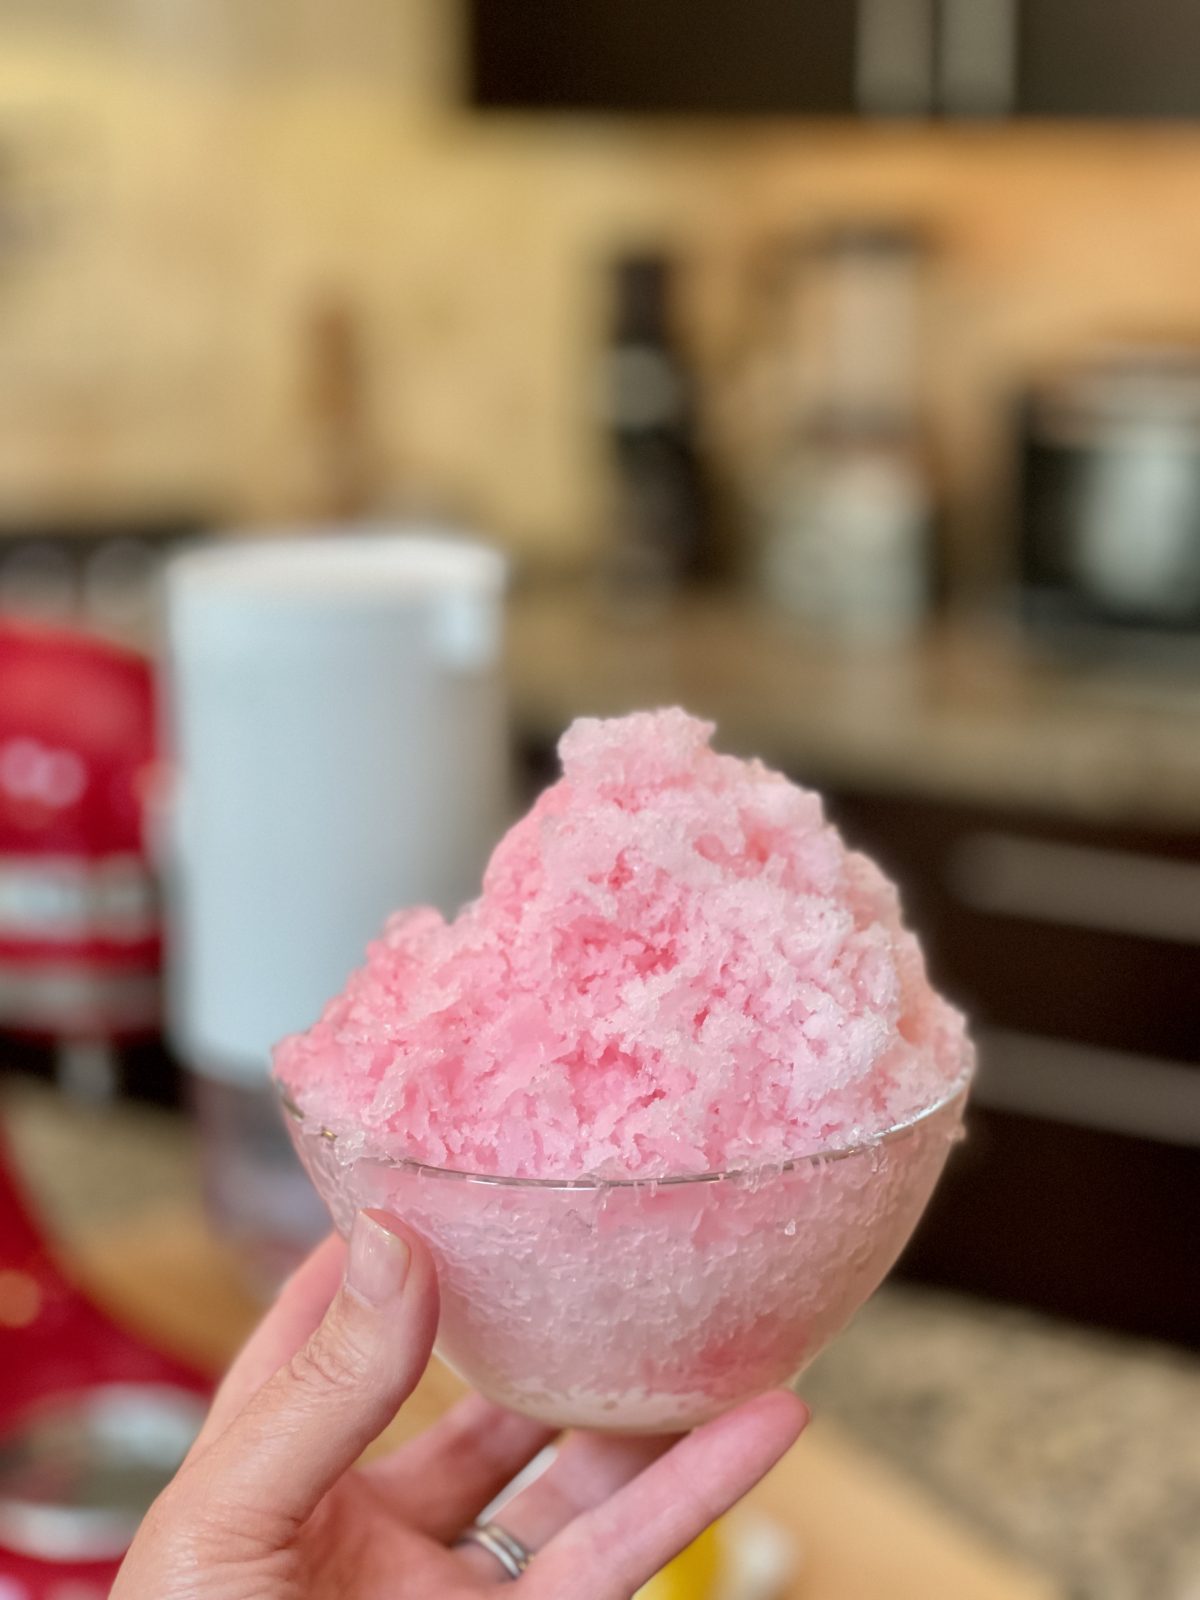 https://www.epicuricloud.com/wp-content/uploads/2022/05/Strawberry-Lemonade-Shave-Ice-so-syrup-in-hand-1200x1600.jpeg